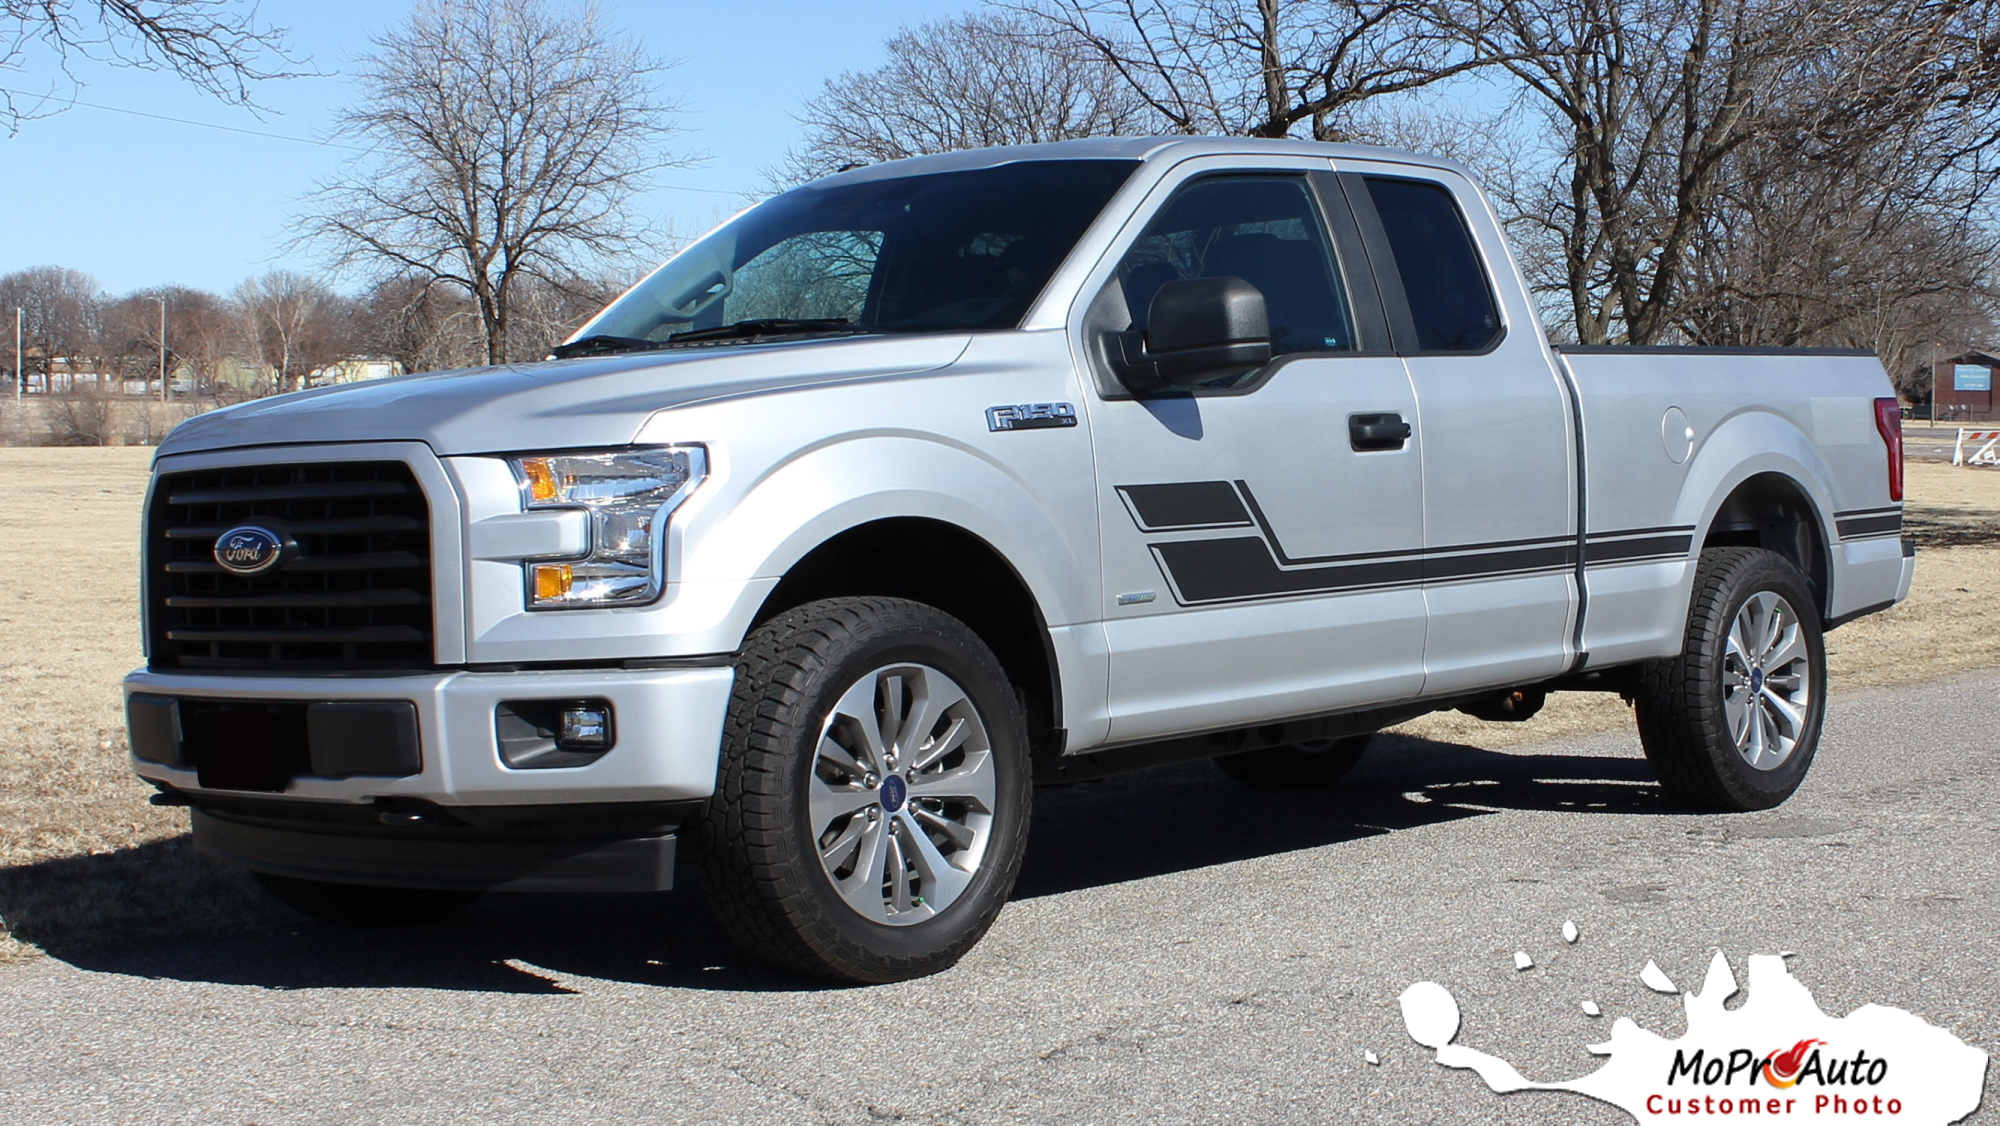 ELIMINATOR Hockey Door Ford F-Series F-150 Appearance Package Vinyl Graphics and Decals Kit - Customer Photo